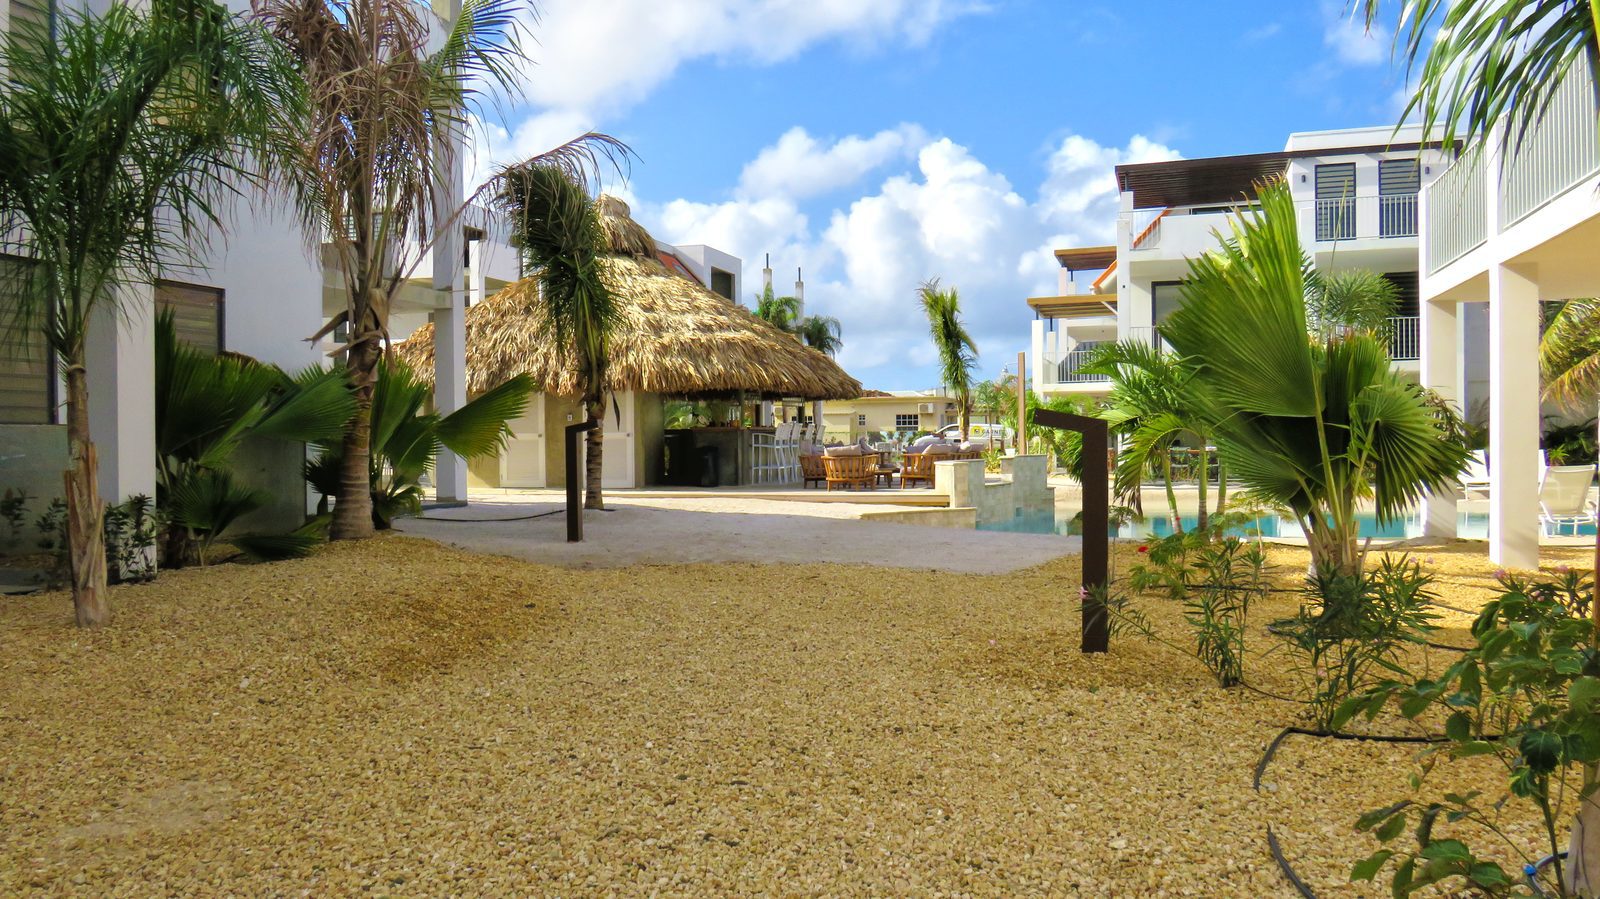 Resort Bonaire is one of the many resorts on this beautiful island. Take a look at more pictures of our facilities and the options of this island.